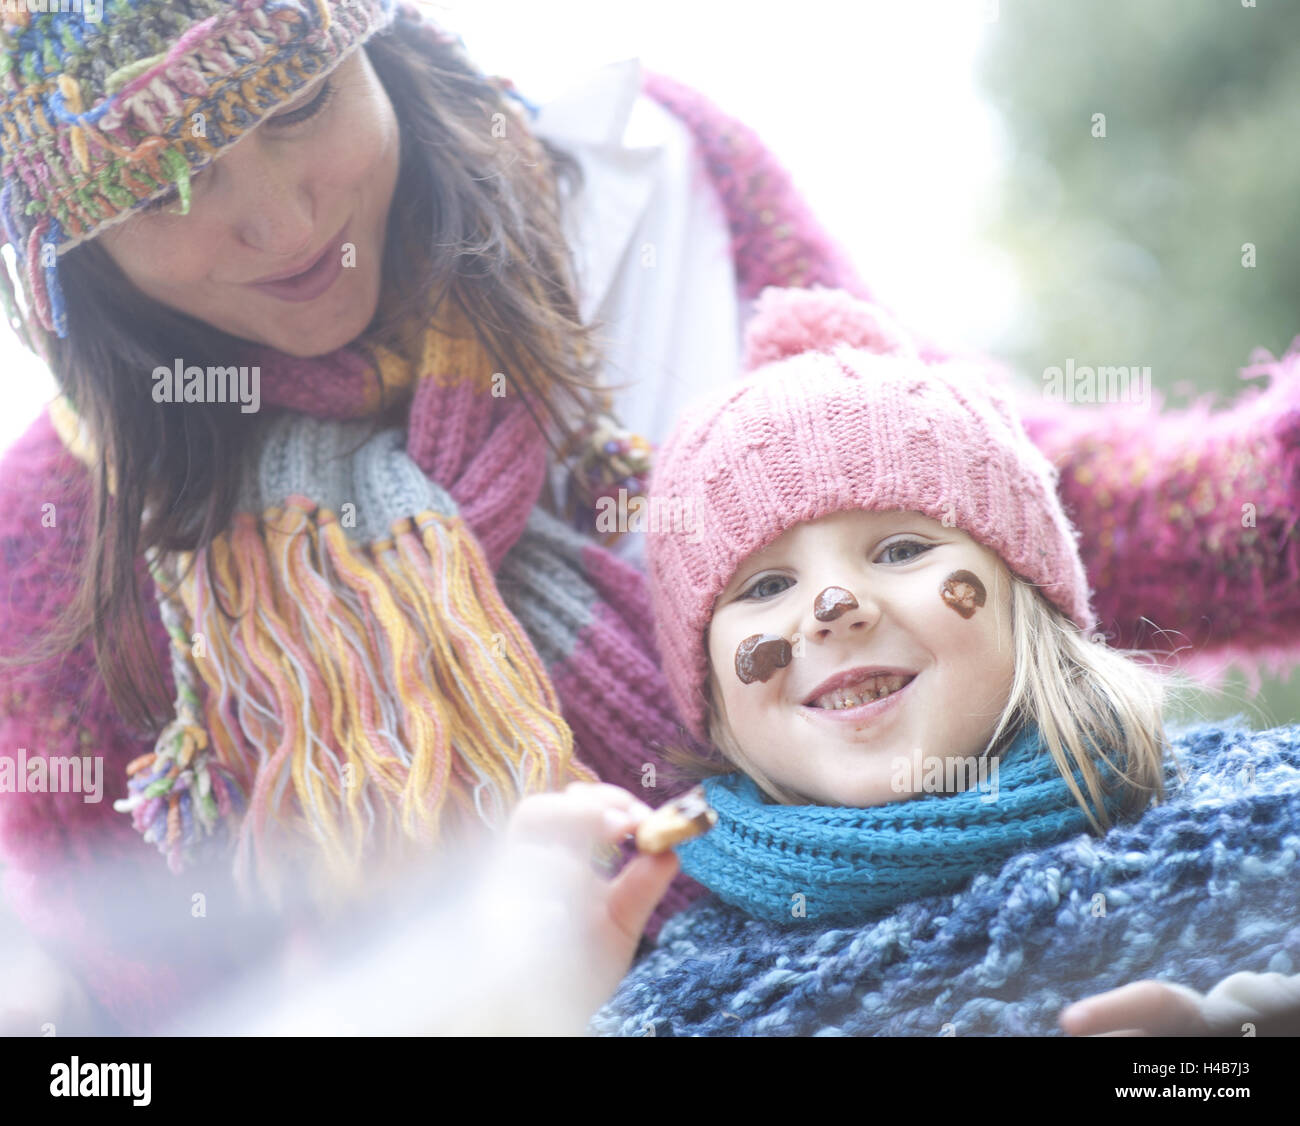 Nut and subsidiary, Christmas little places, eat, nibble, chocolate in the look, portrait, Stock Photo